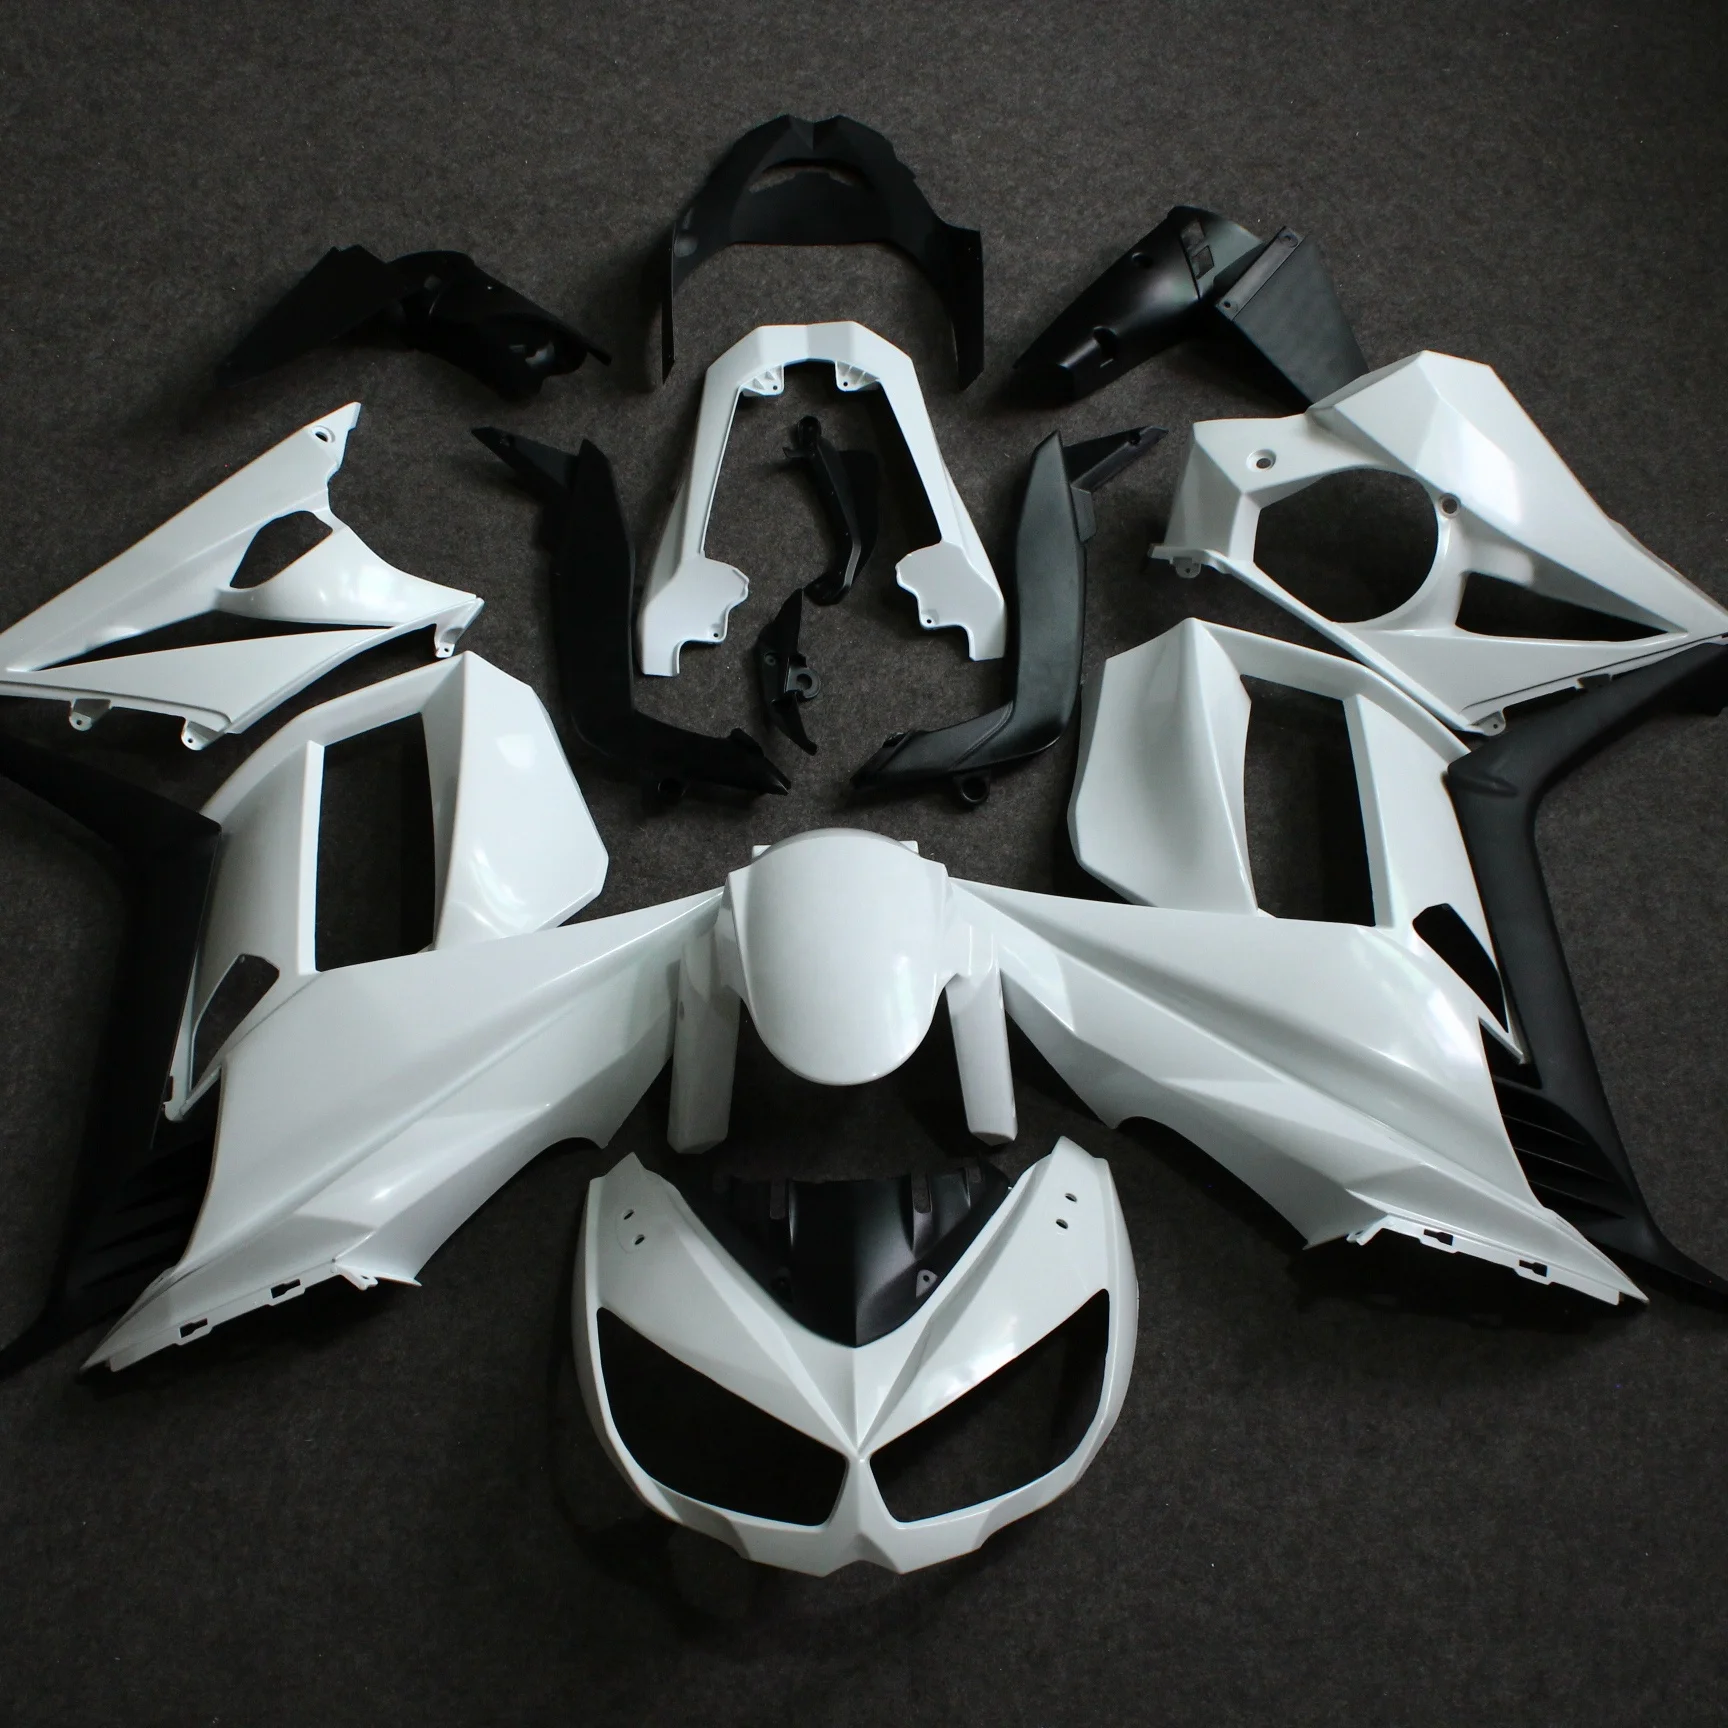 

2021 WHSC painted Bodywork For KAWASAKI Z1000SX 2010 Fairing Body Kit unpainted, Pictures shown